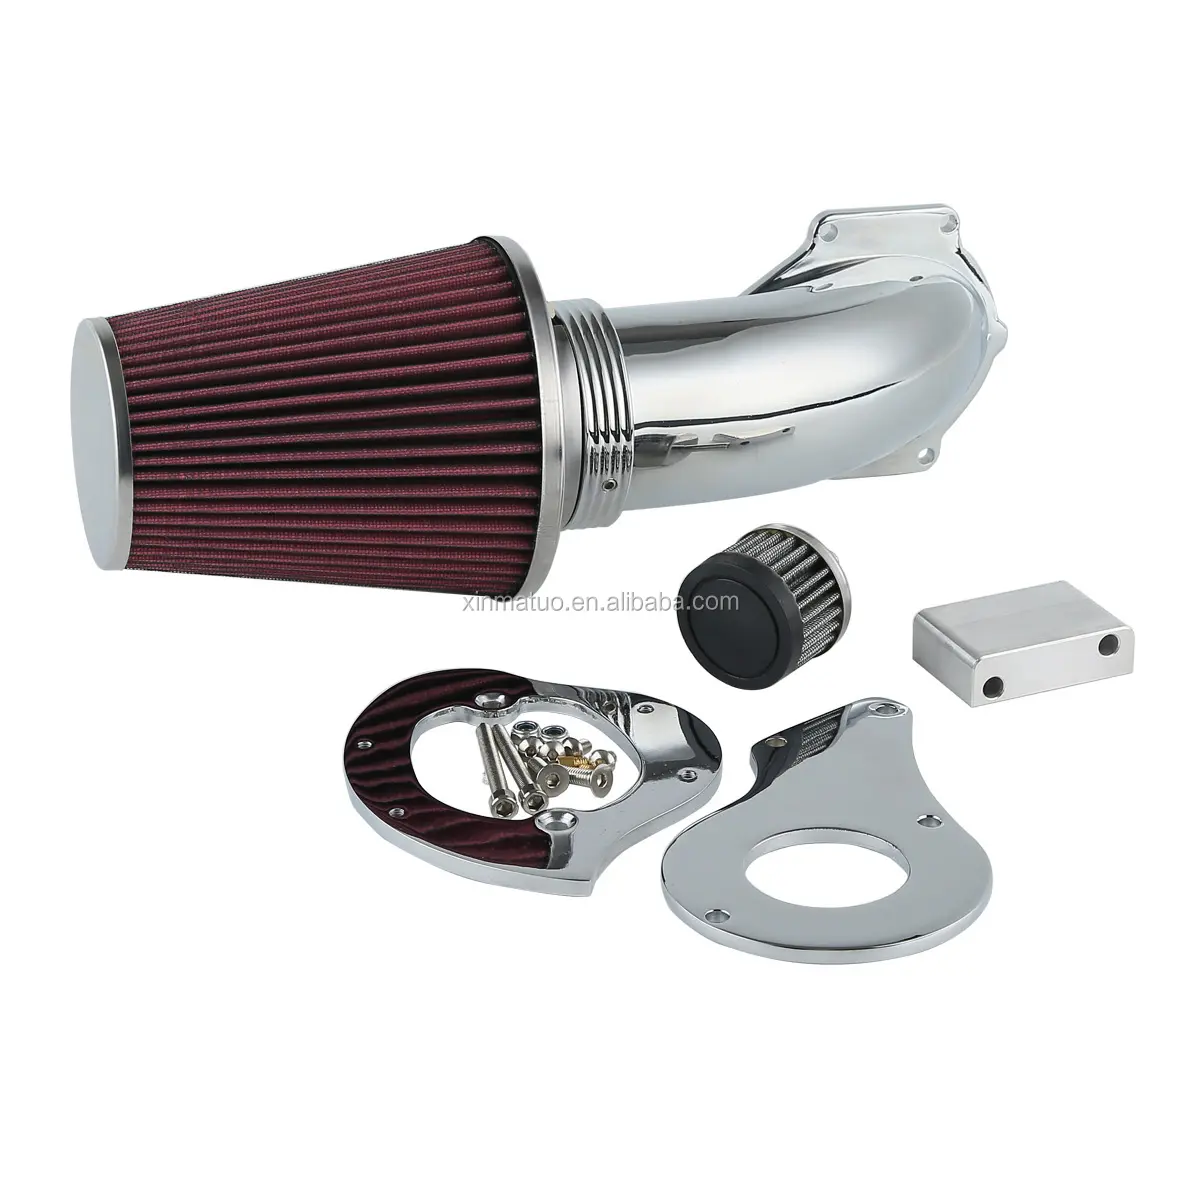 XF130671-E Air Filter Cleaner Intake Cone For Honda Shadow VT600C 99-17 16 VLX Deluxe 600